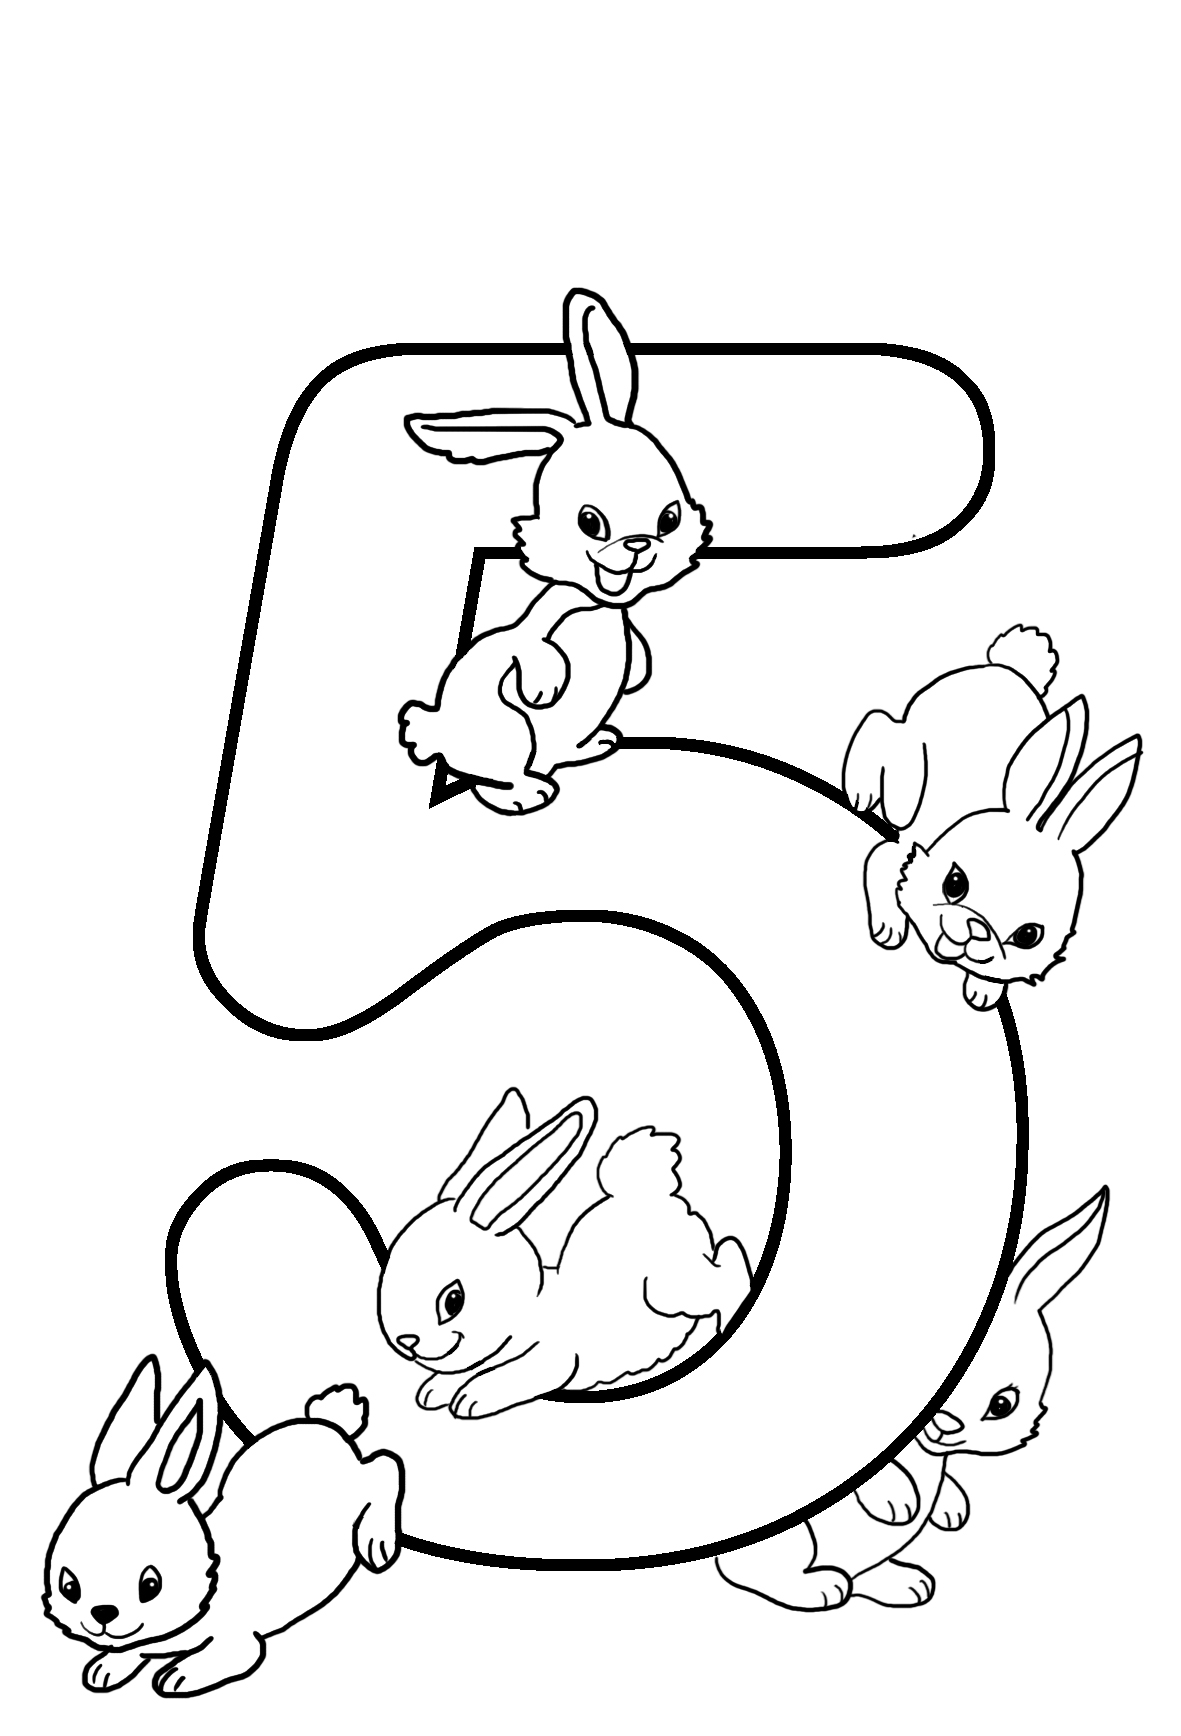 5th birthday coloring with rabbits